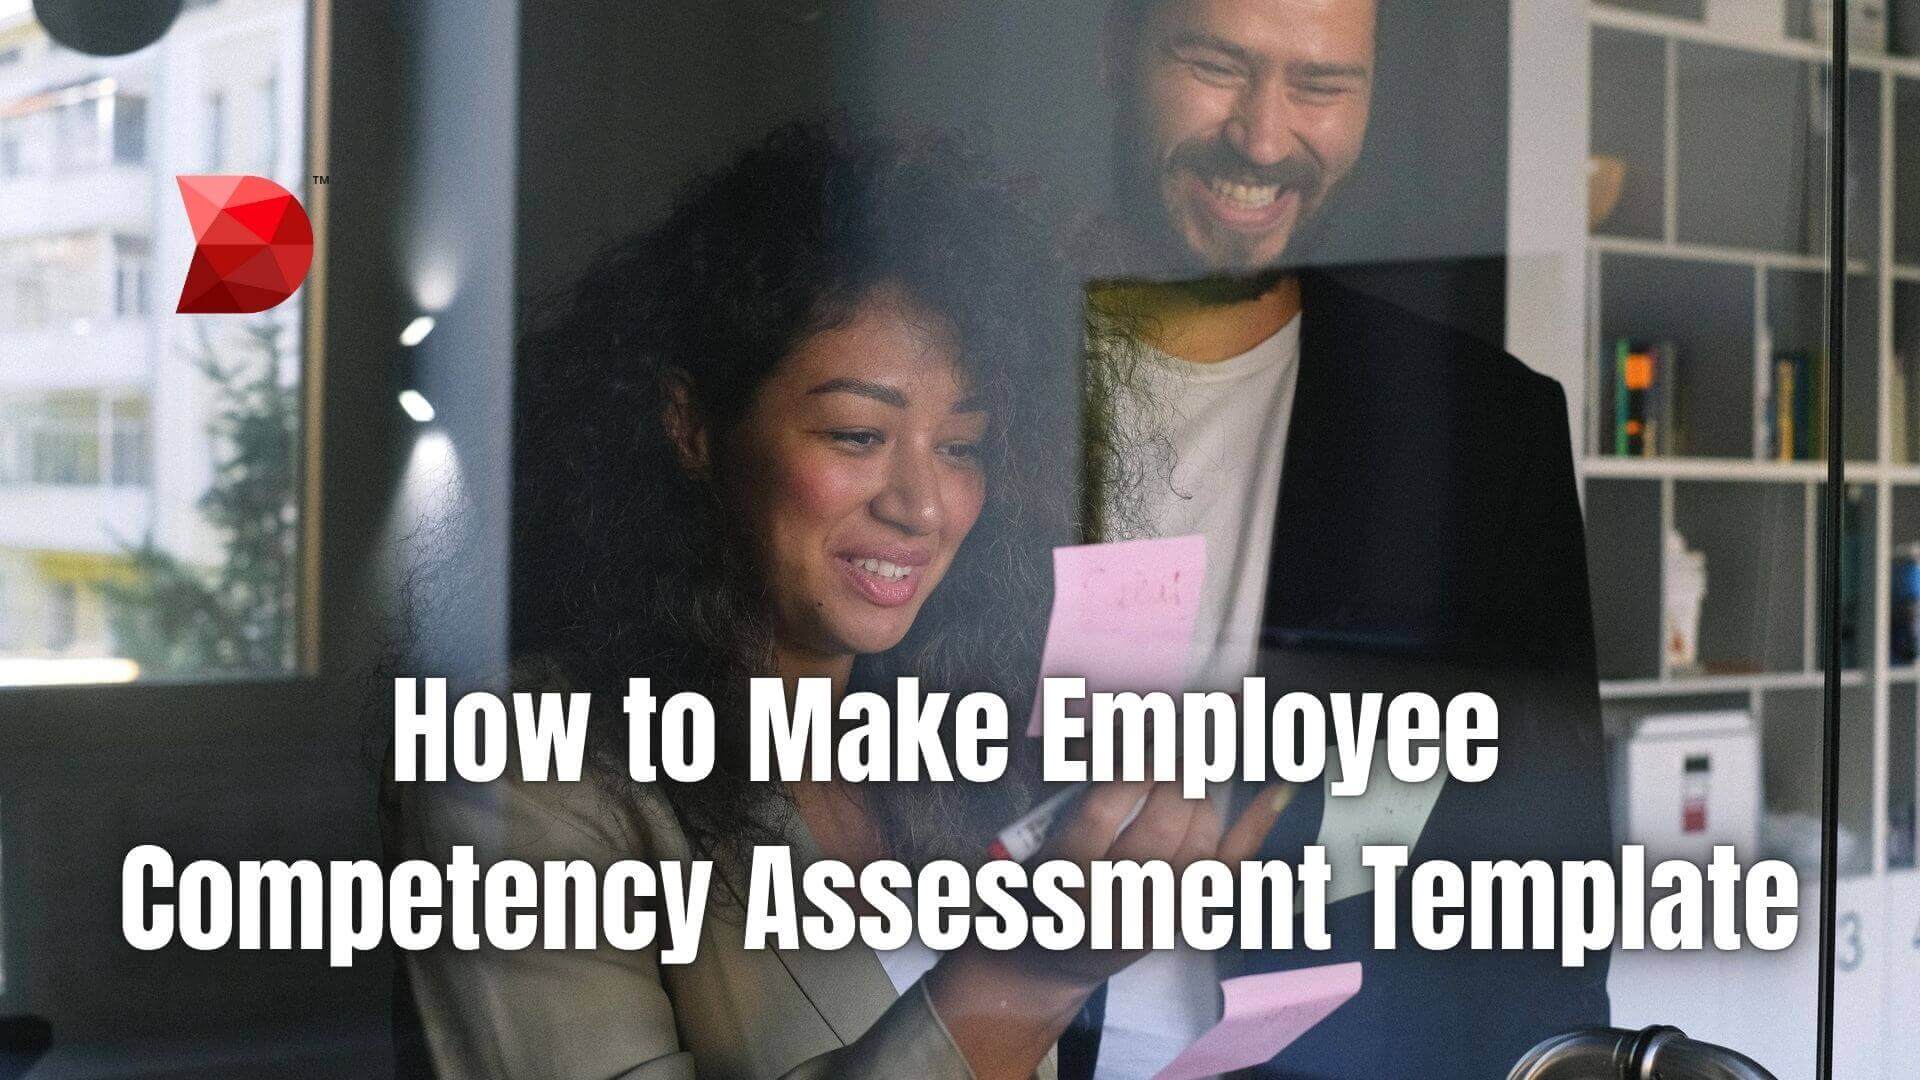 How to Make Employee Competency Assessment Template